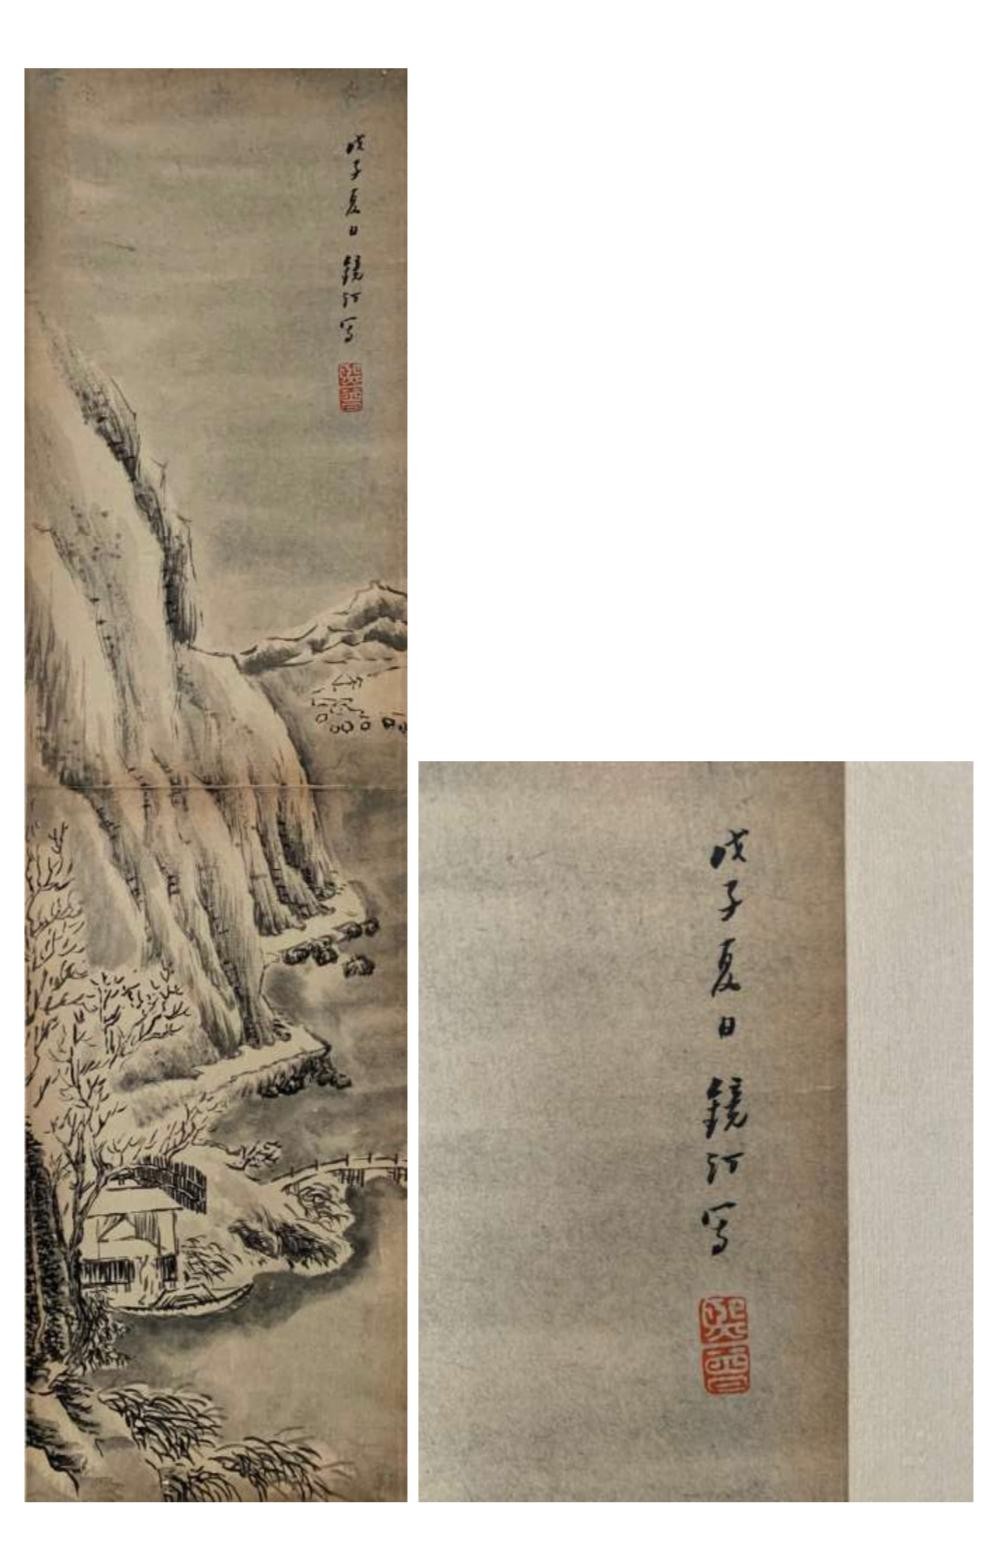 Landscape: Imitates Wang Hui's style. Chinese ink on paper scroll. Attribute to Wu Jingting. 49. - Image 6 of 6